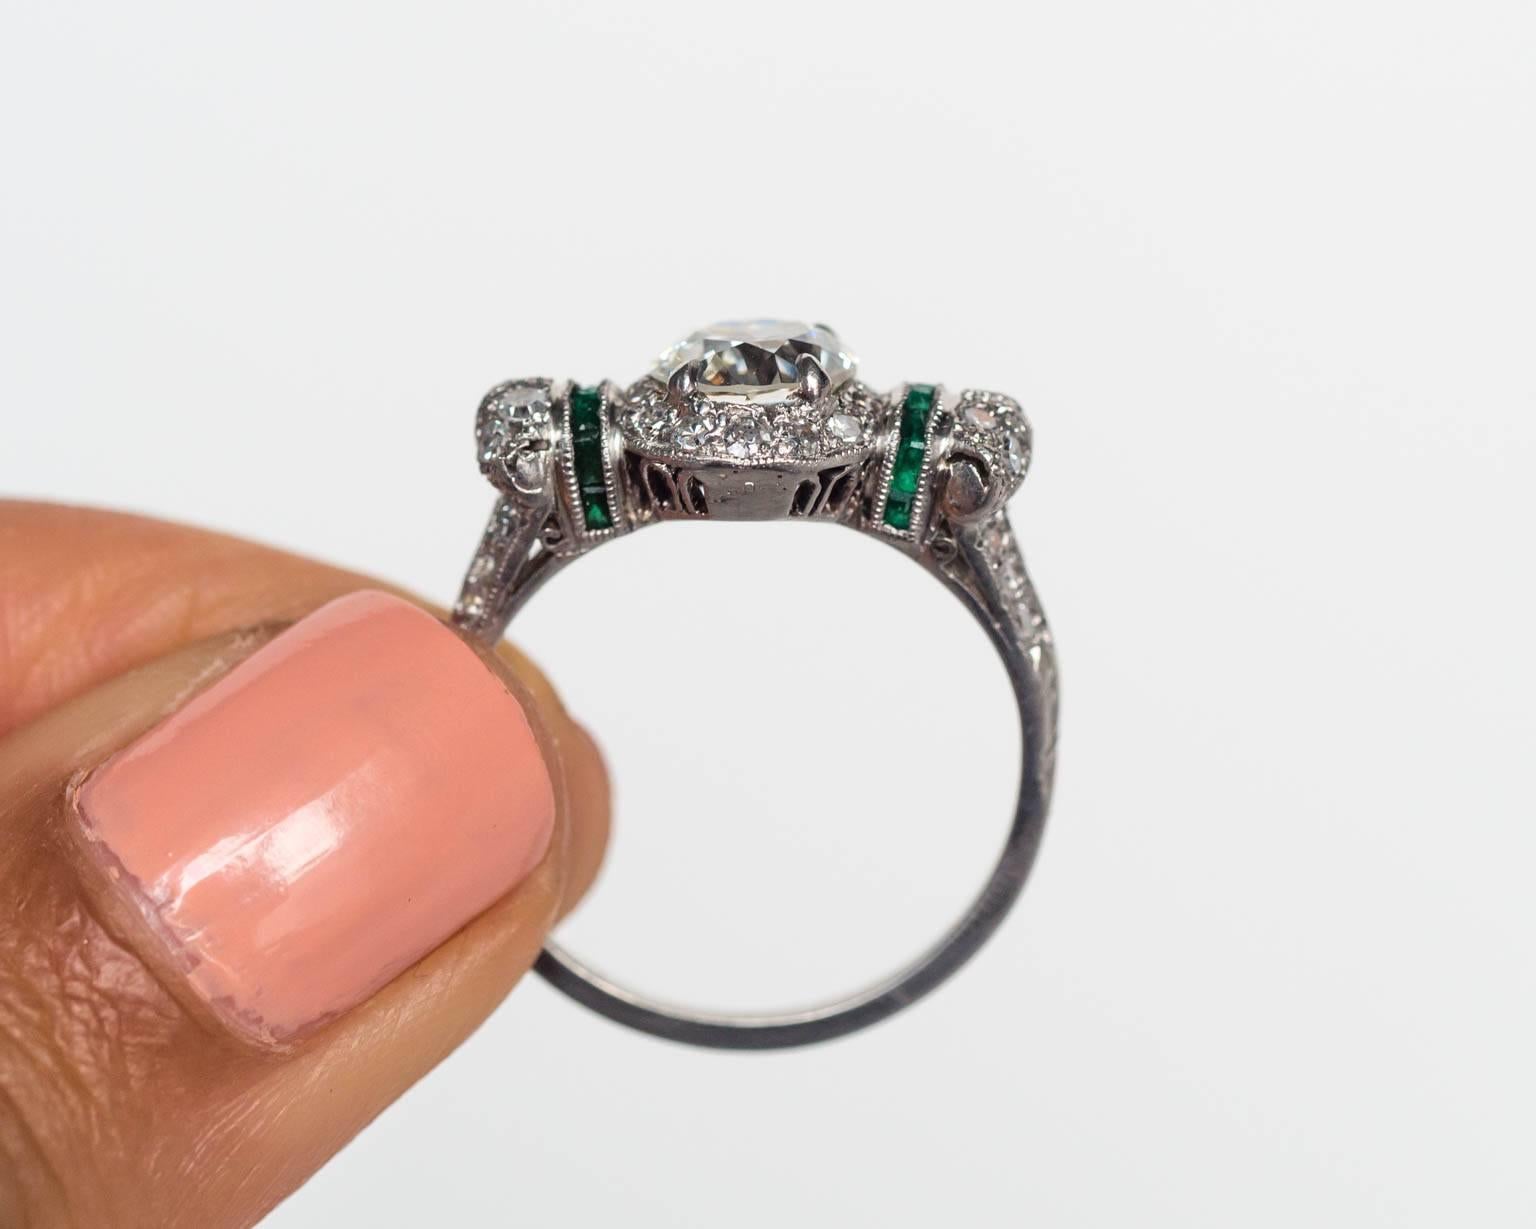 Spectacular and intricate Art Deco engagement ring. 

Center Diamond Details: GIA Certified. 
.97ct, I color, VS2 clarity. 
Report #2171876537

Metal: Platinum
Emerald Details: Natural, .25cttw, Pure green. 
Ring Size: 6.5

This ring can